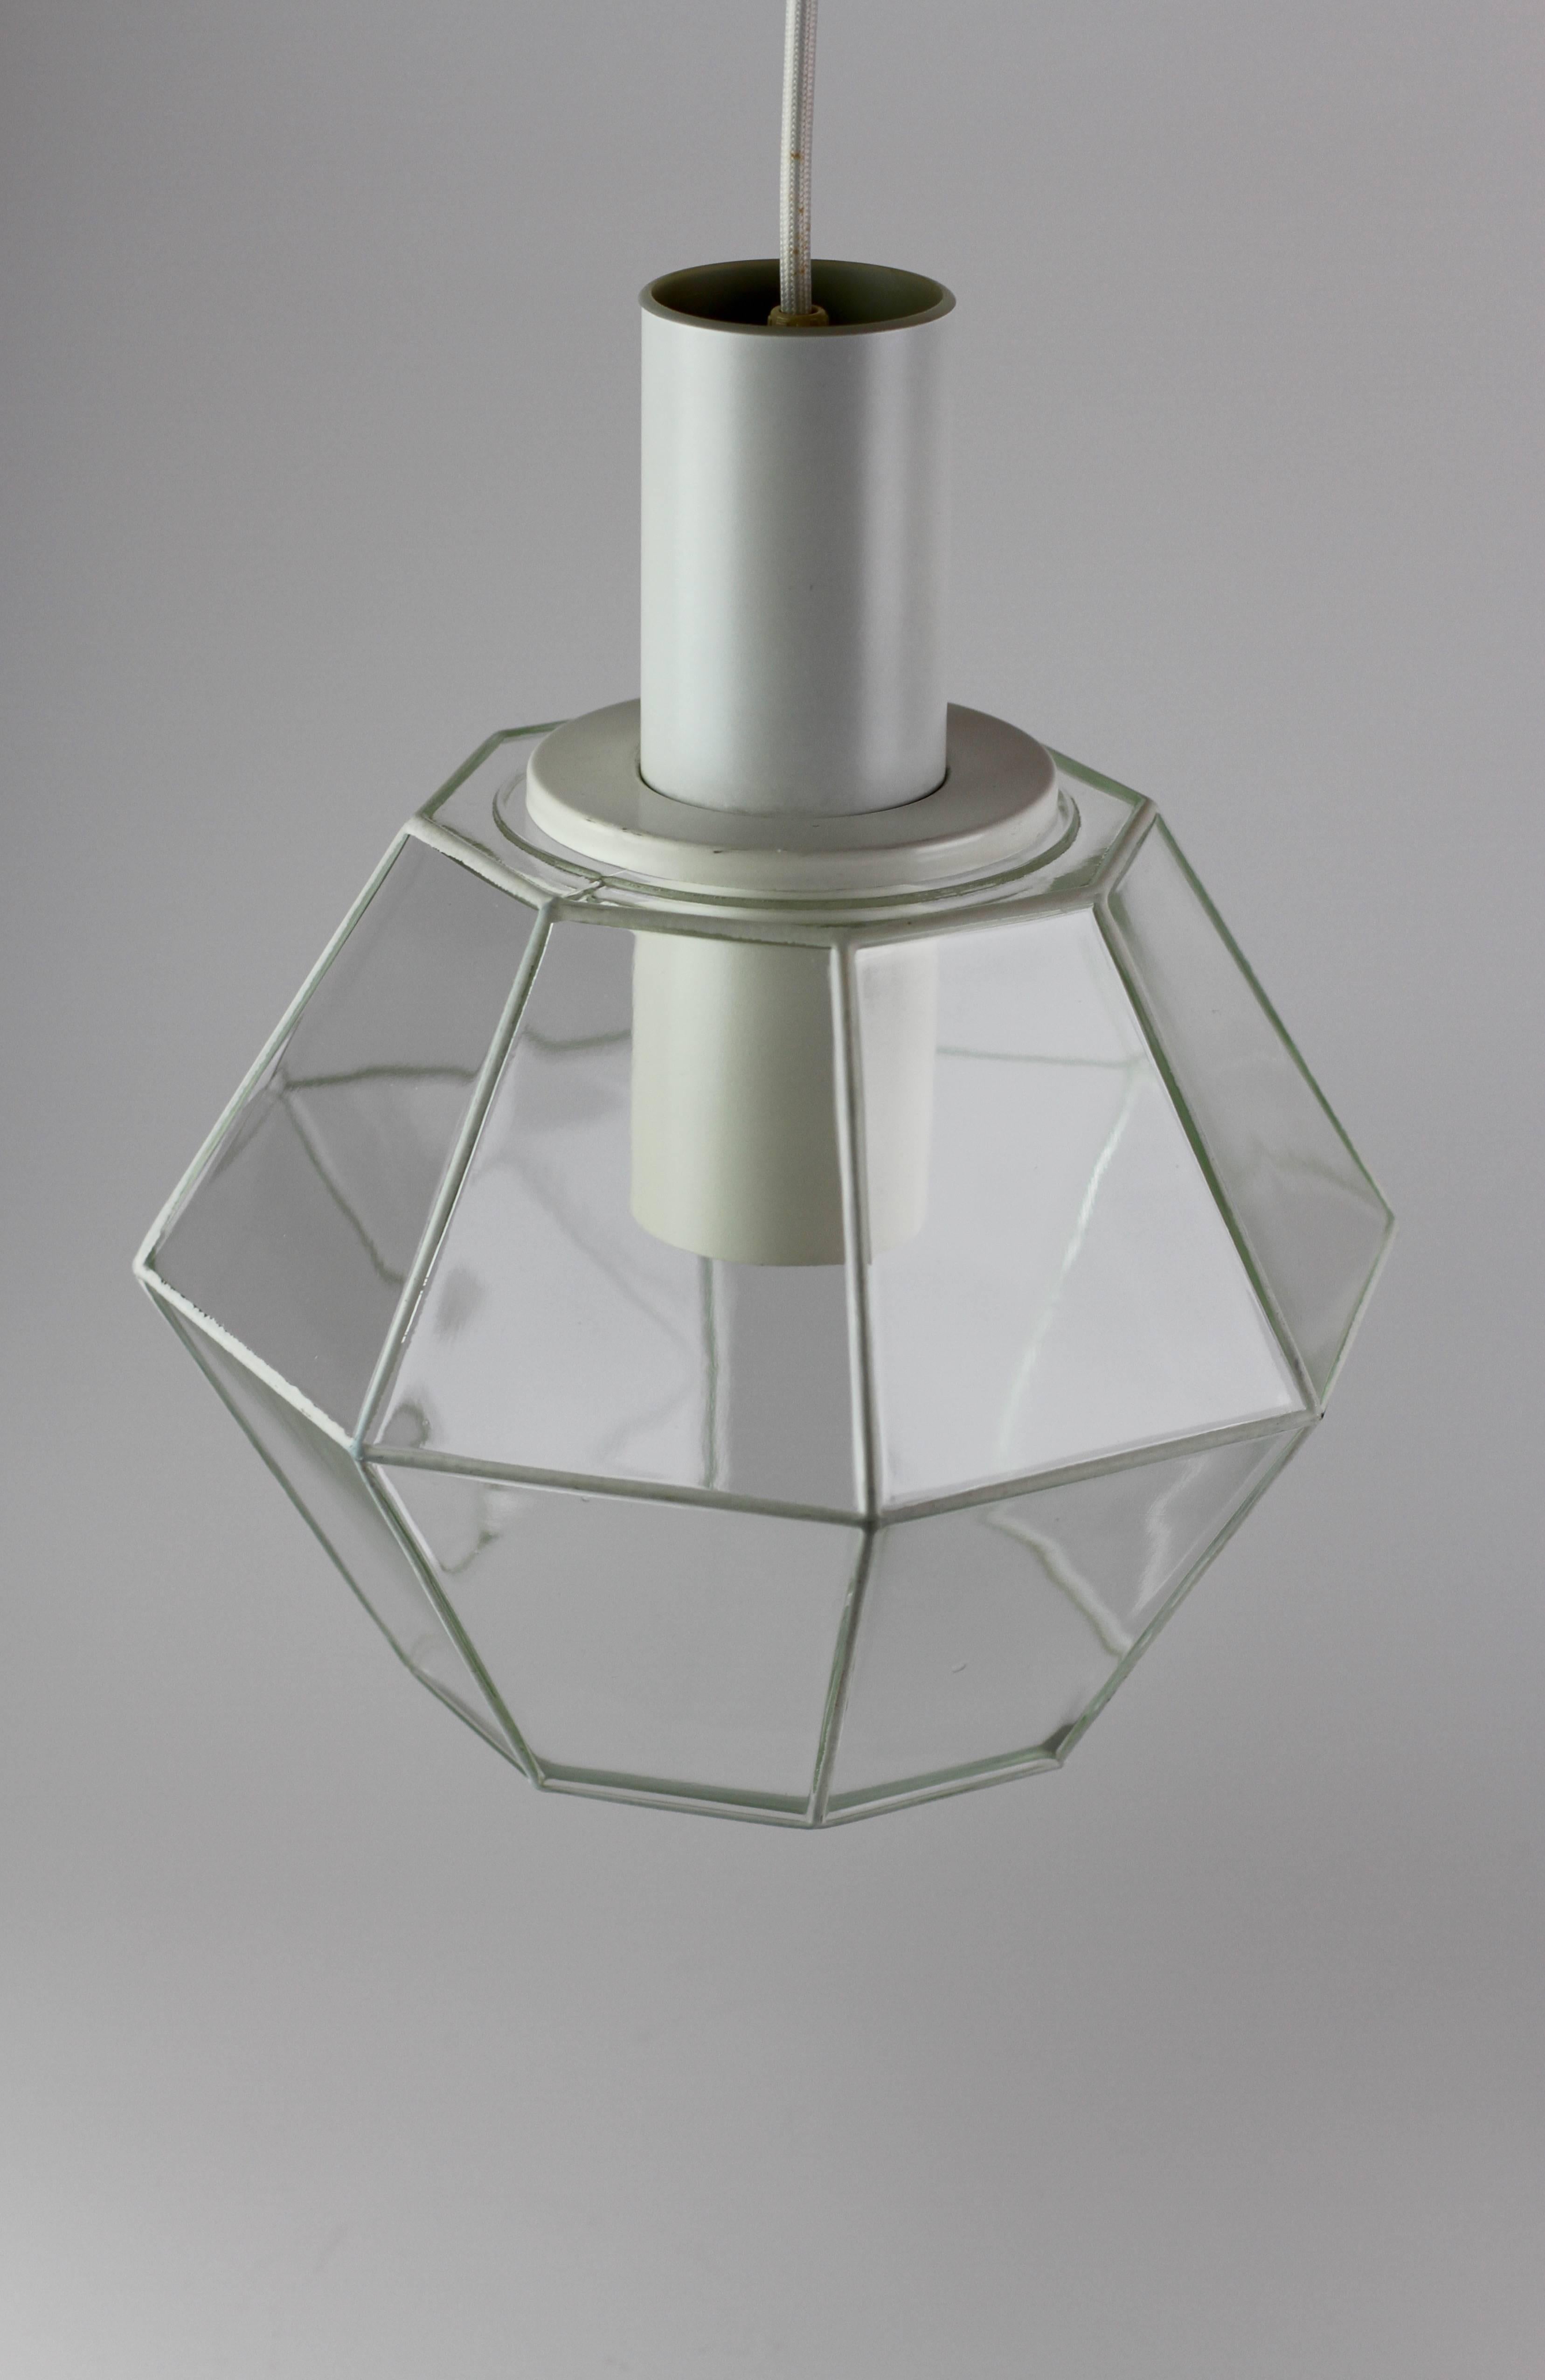 Molded Limburg 1 of 4 Vintage 1970s Geometric White & Clear Glass Pendant Lights Lamps For Sale